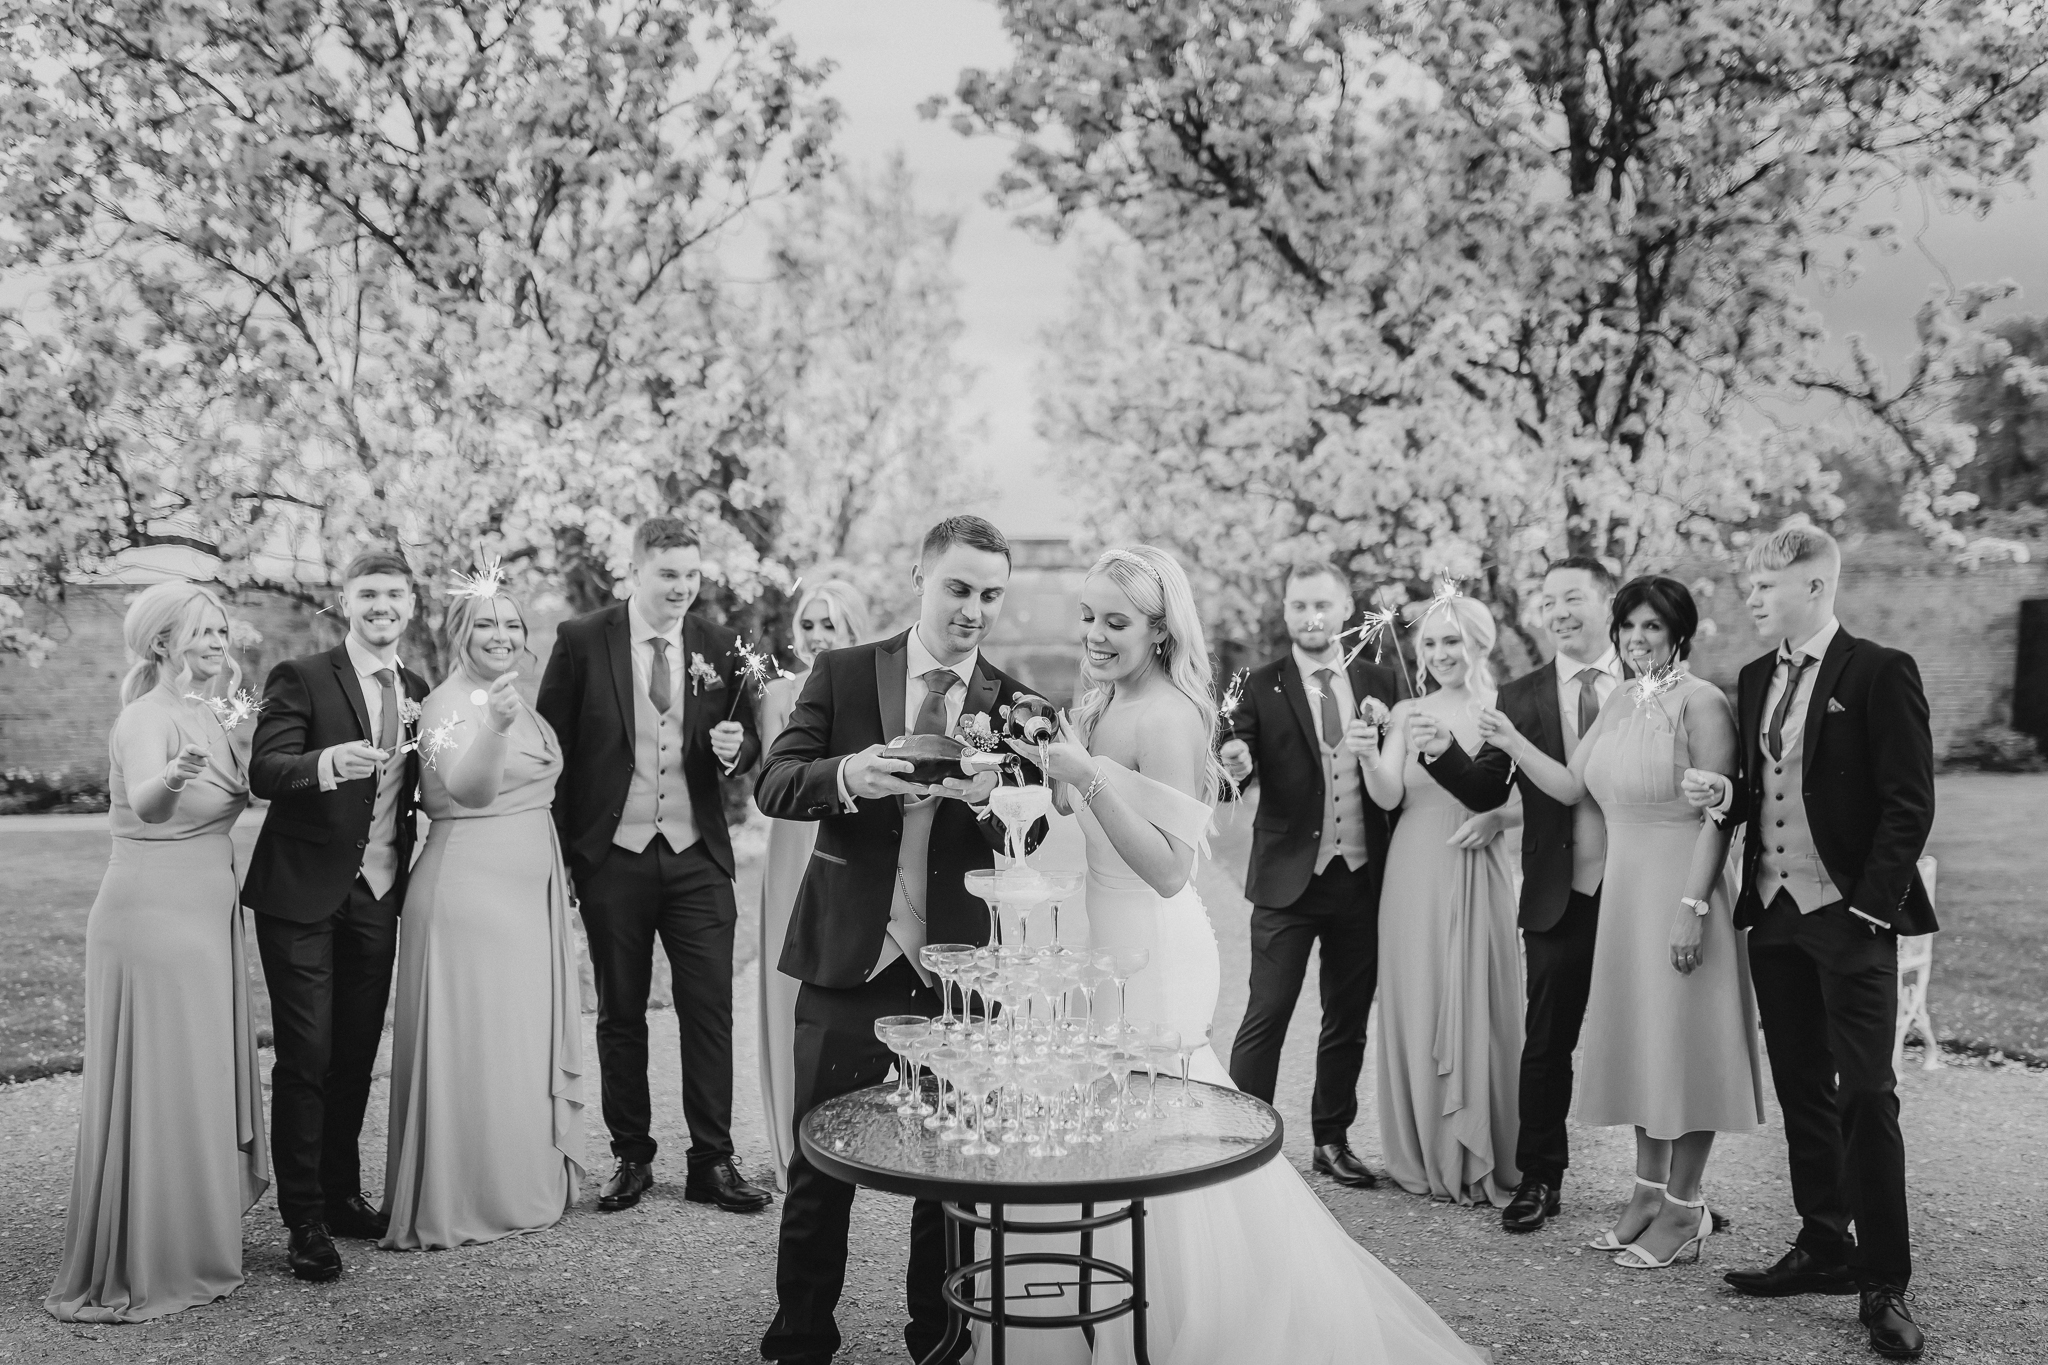 Kelsey and Spencer pouring Champagne with their bridal party surrounding them with sparklers at Combermere Abbey in Cheshire